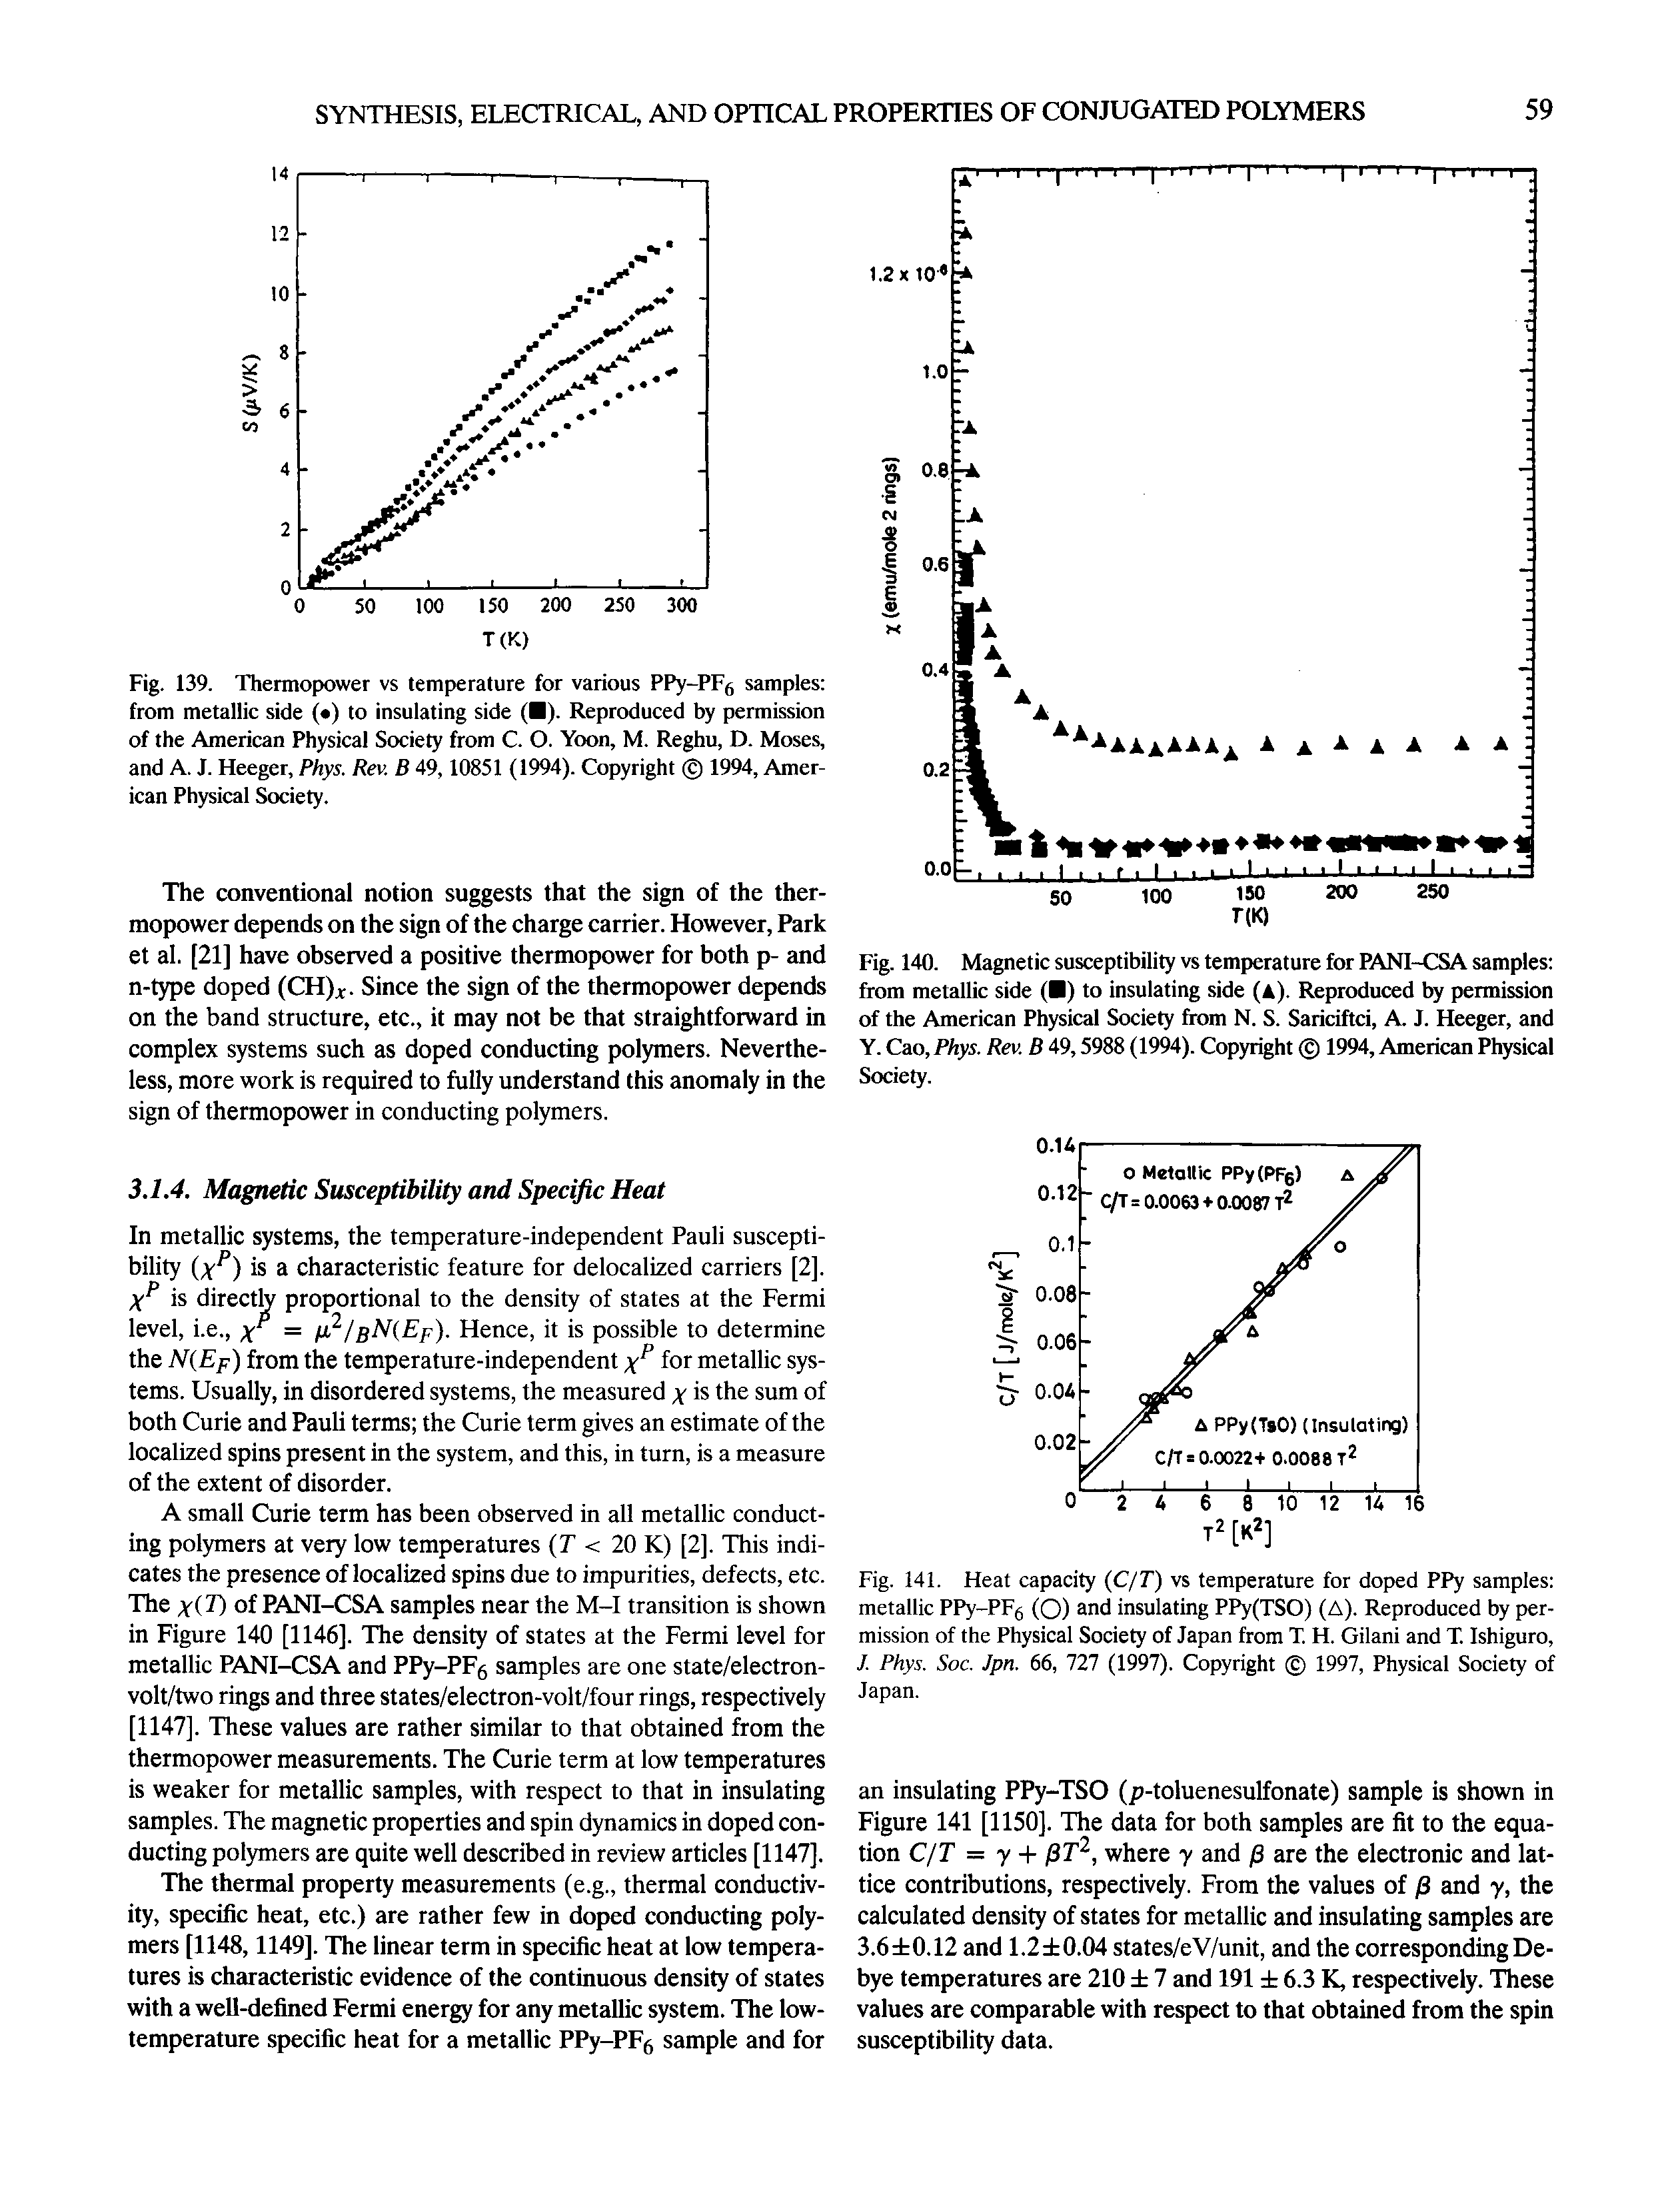 Fig. 140. Magnetic susceptibility vs temperature for PANI-CSA samples from metallic side ( ) to insulating side (A). Reproduced by permission of the American Physical Society from N. S. Sariciftci, A J. Heeger, and Y. Cao, Phys. Rev. B 49,5988 (1994). Copyright 1994, American Physical Society.